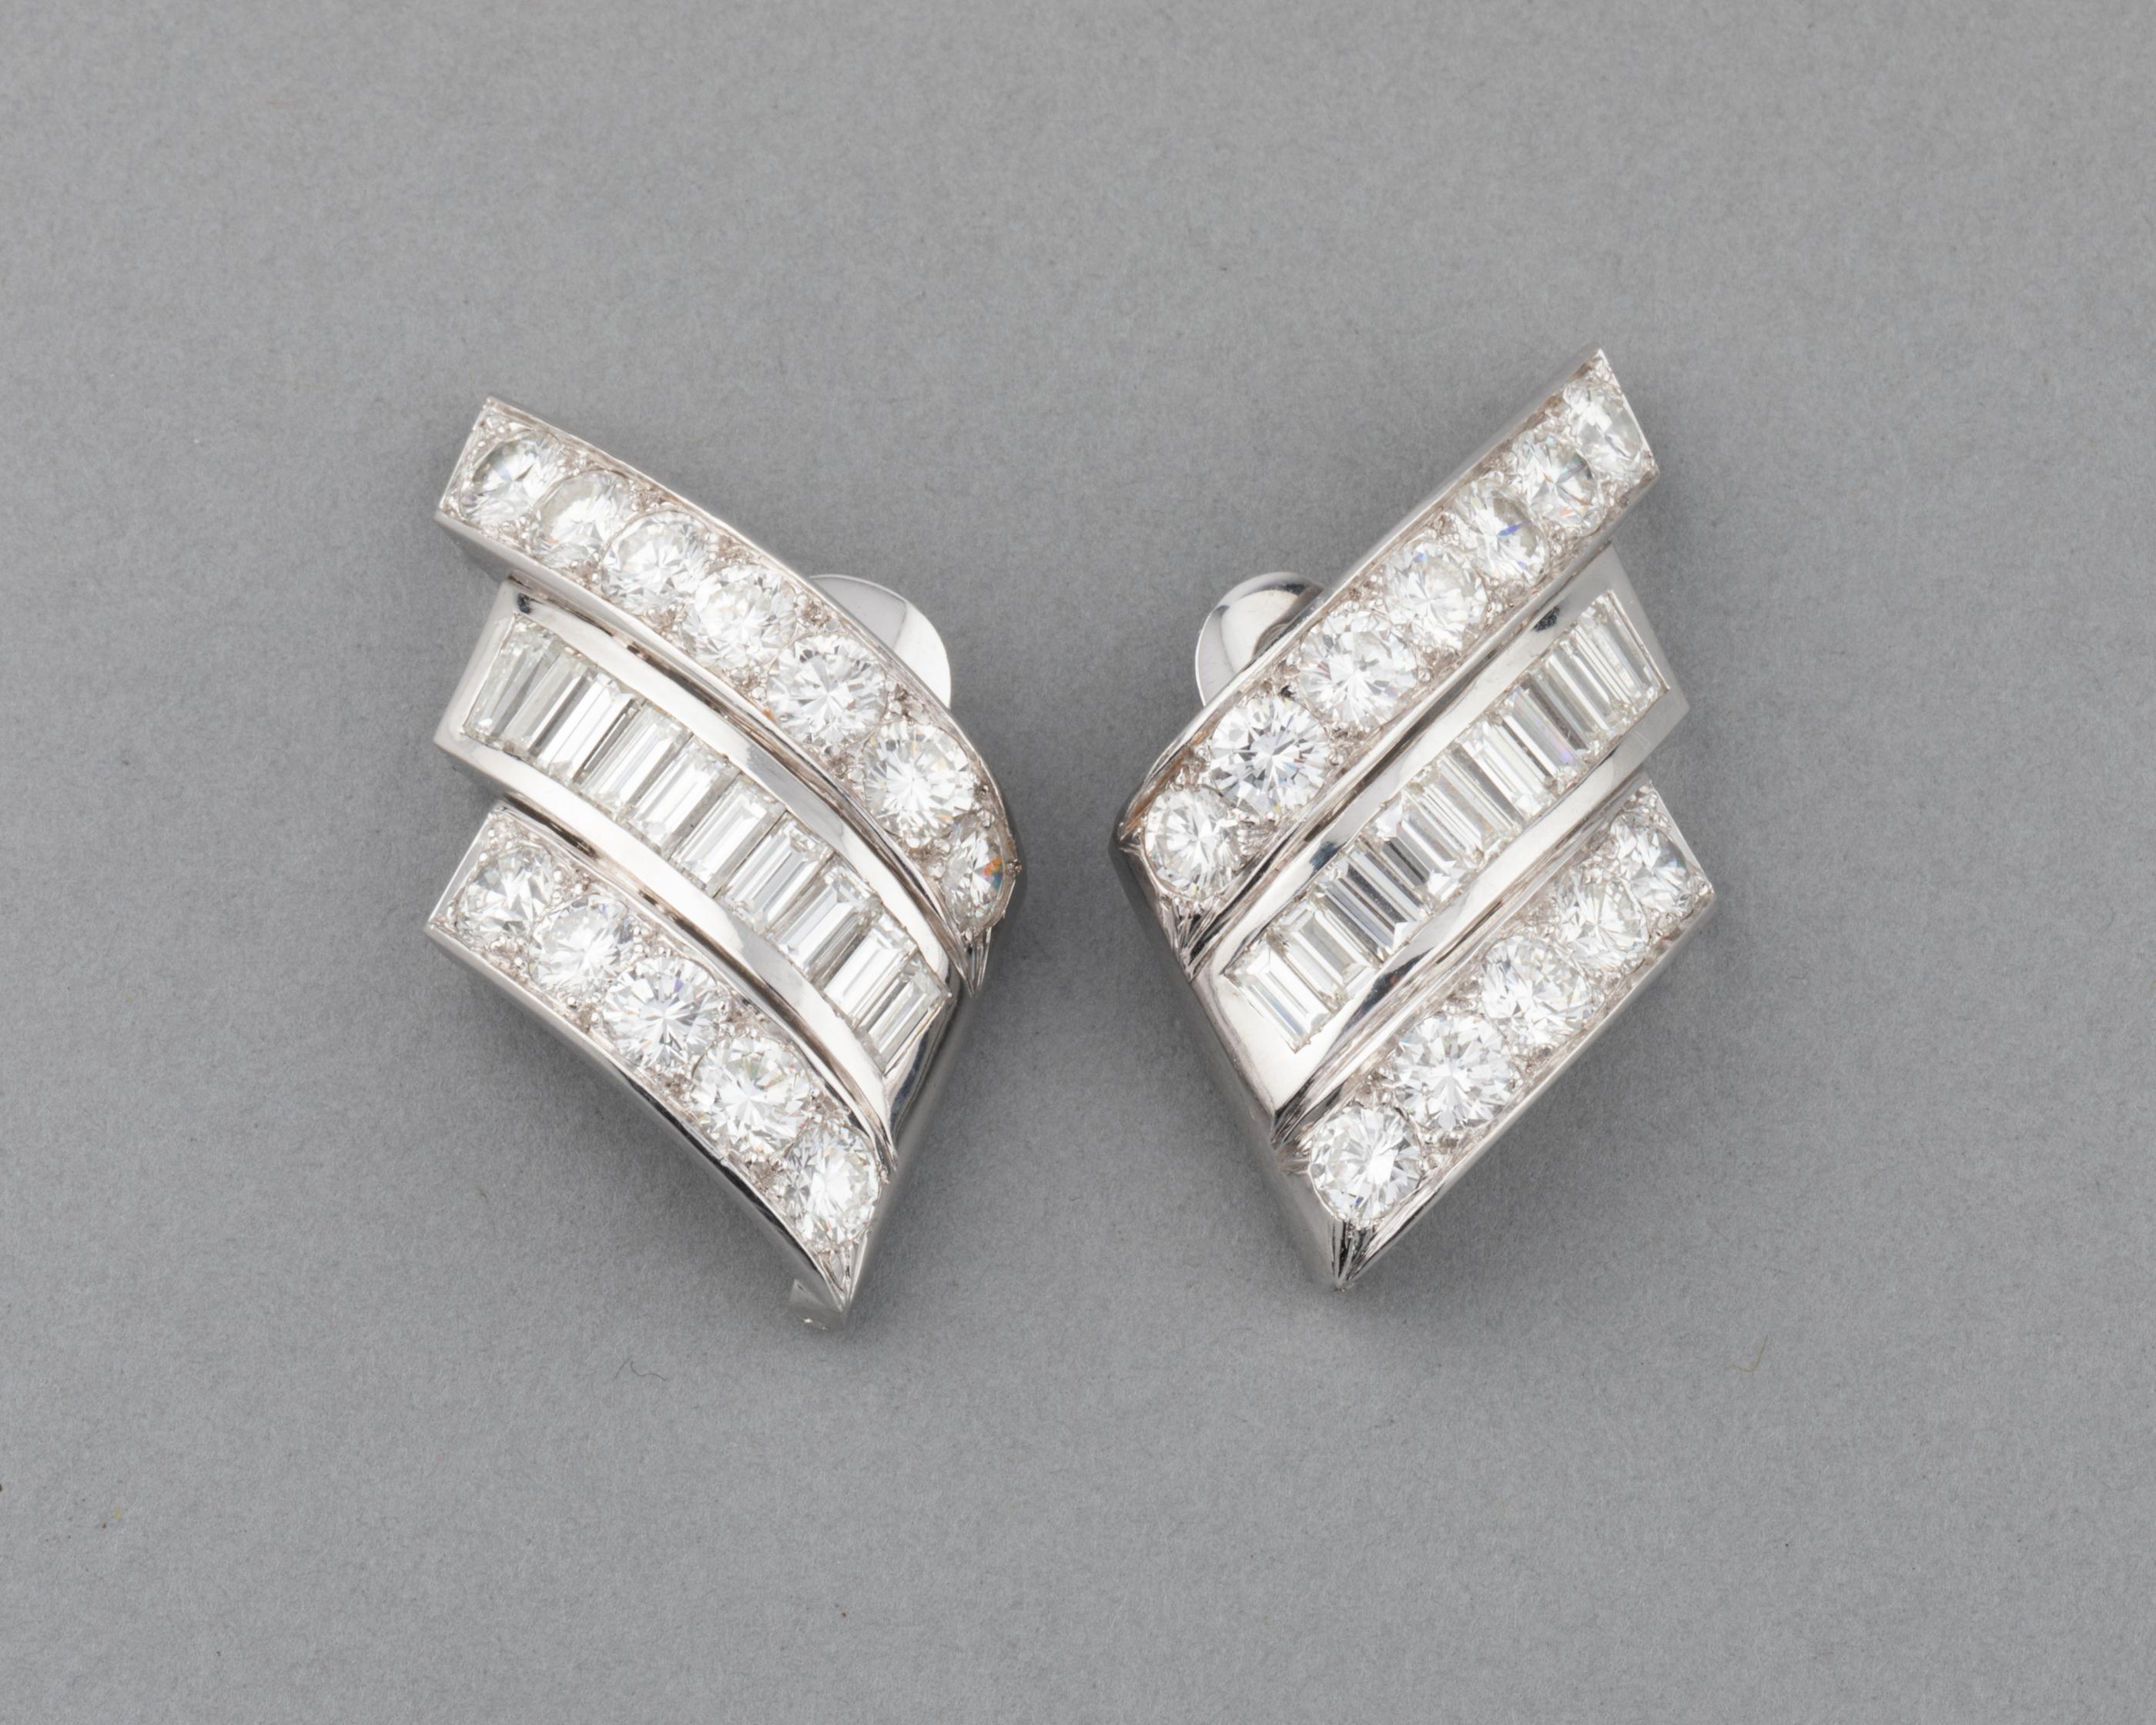 Very beautiful pair of earrings, made in France circa 1950.
The diamonds are high quality, 5 carats per earrings. 2 lines of brilliant cut diamonds (4.20 carats) and one line of baguettes (1.10 carats).
They are big: 4 cm height and 2 cm width (1.6